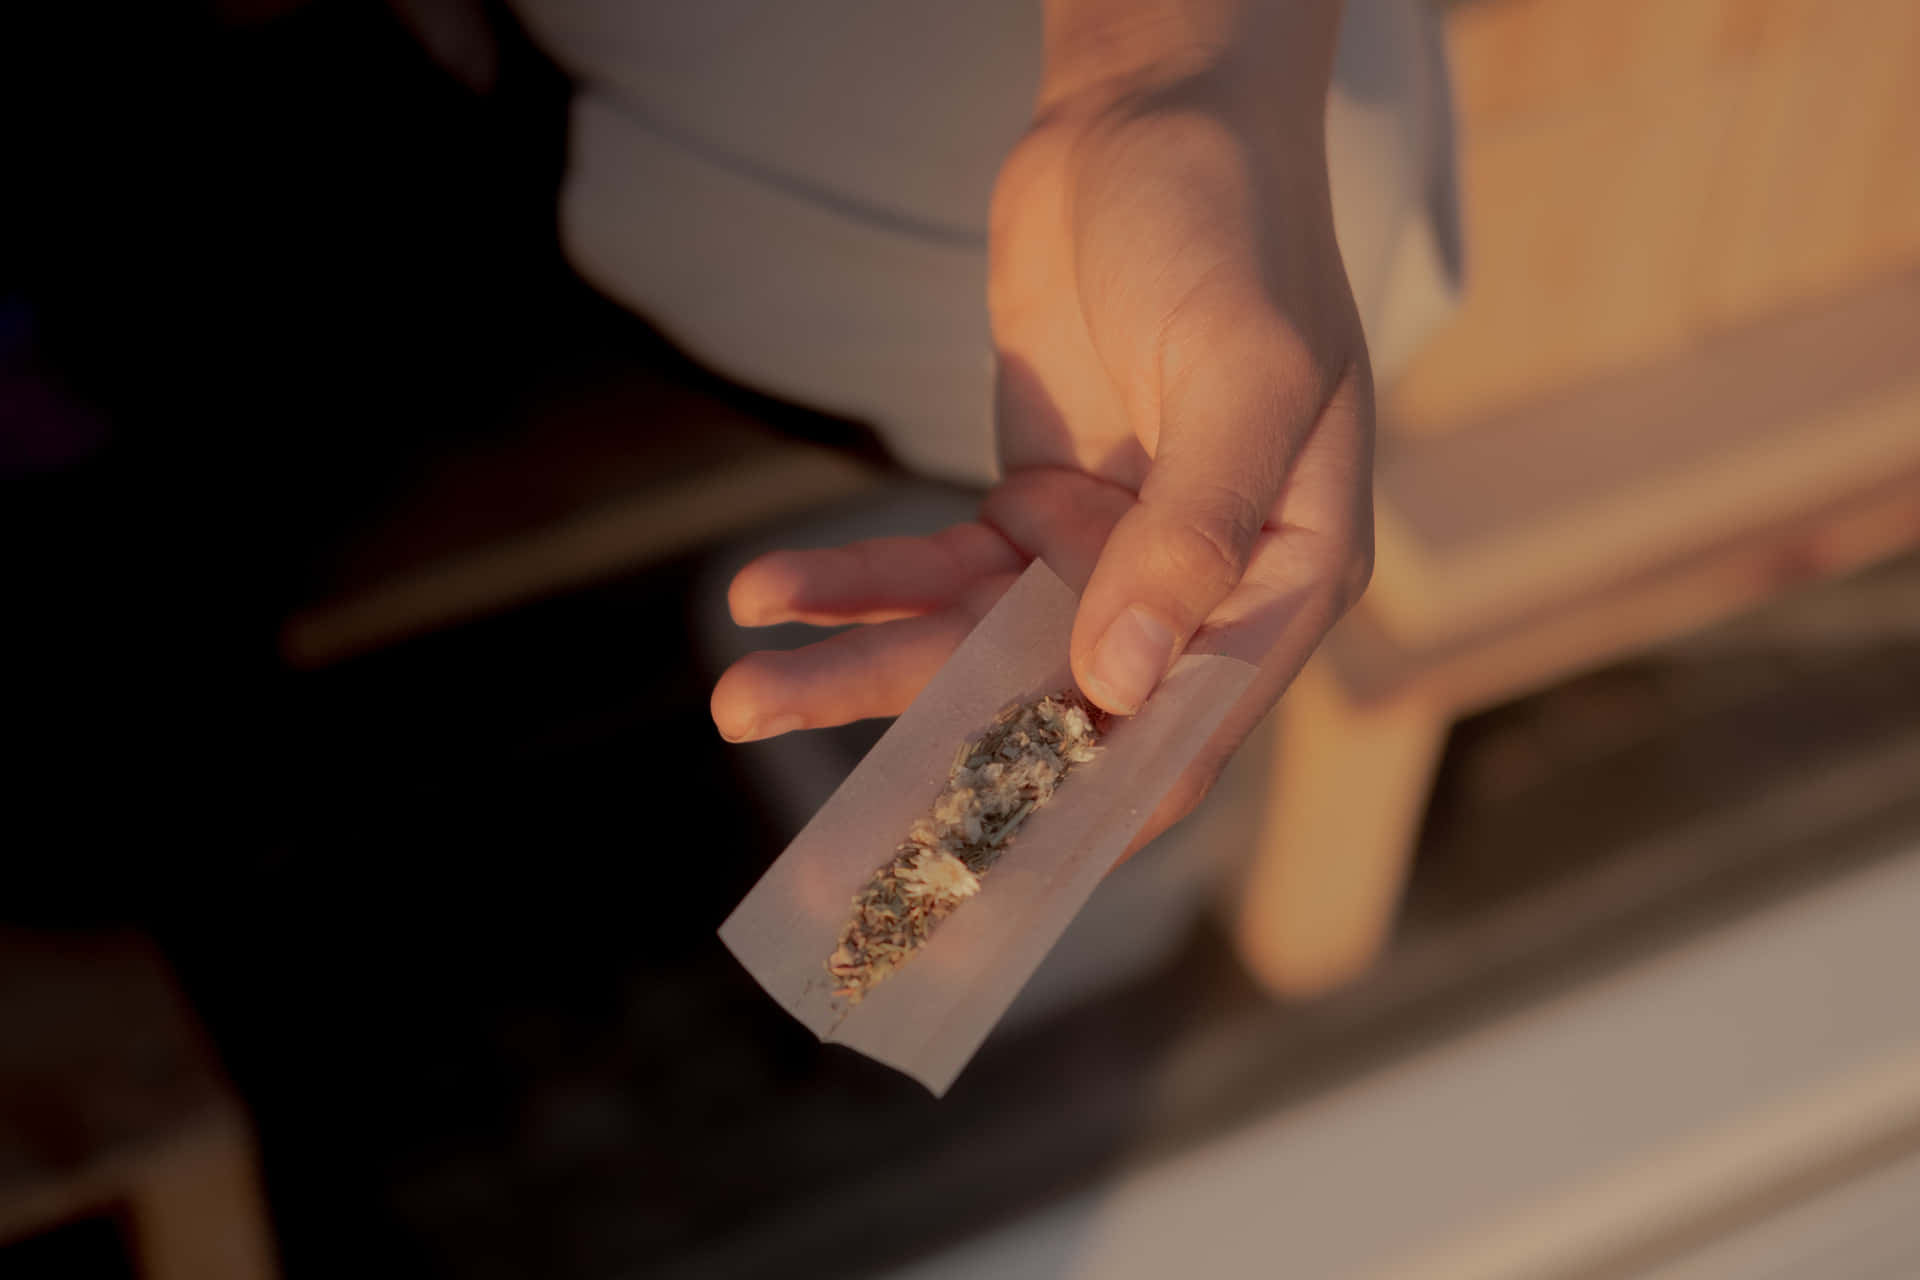 Rolling up your own weed blunt - the perfect way to enjoy an evening with friends. Wallpaper